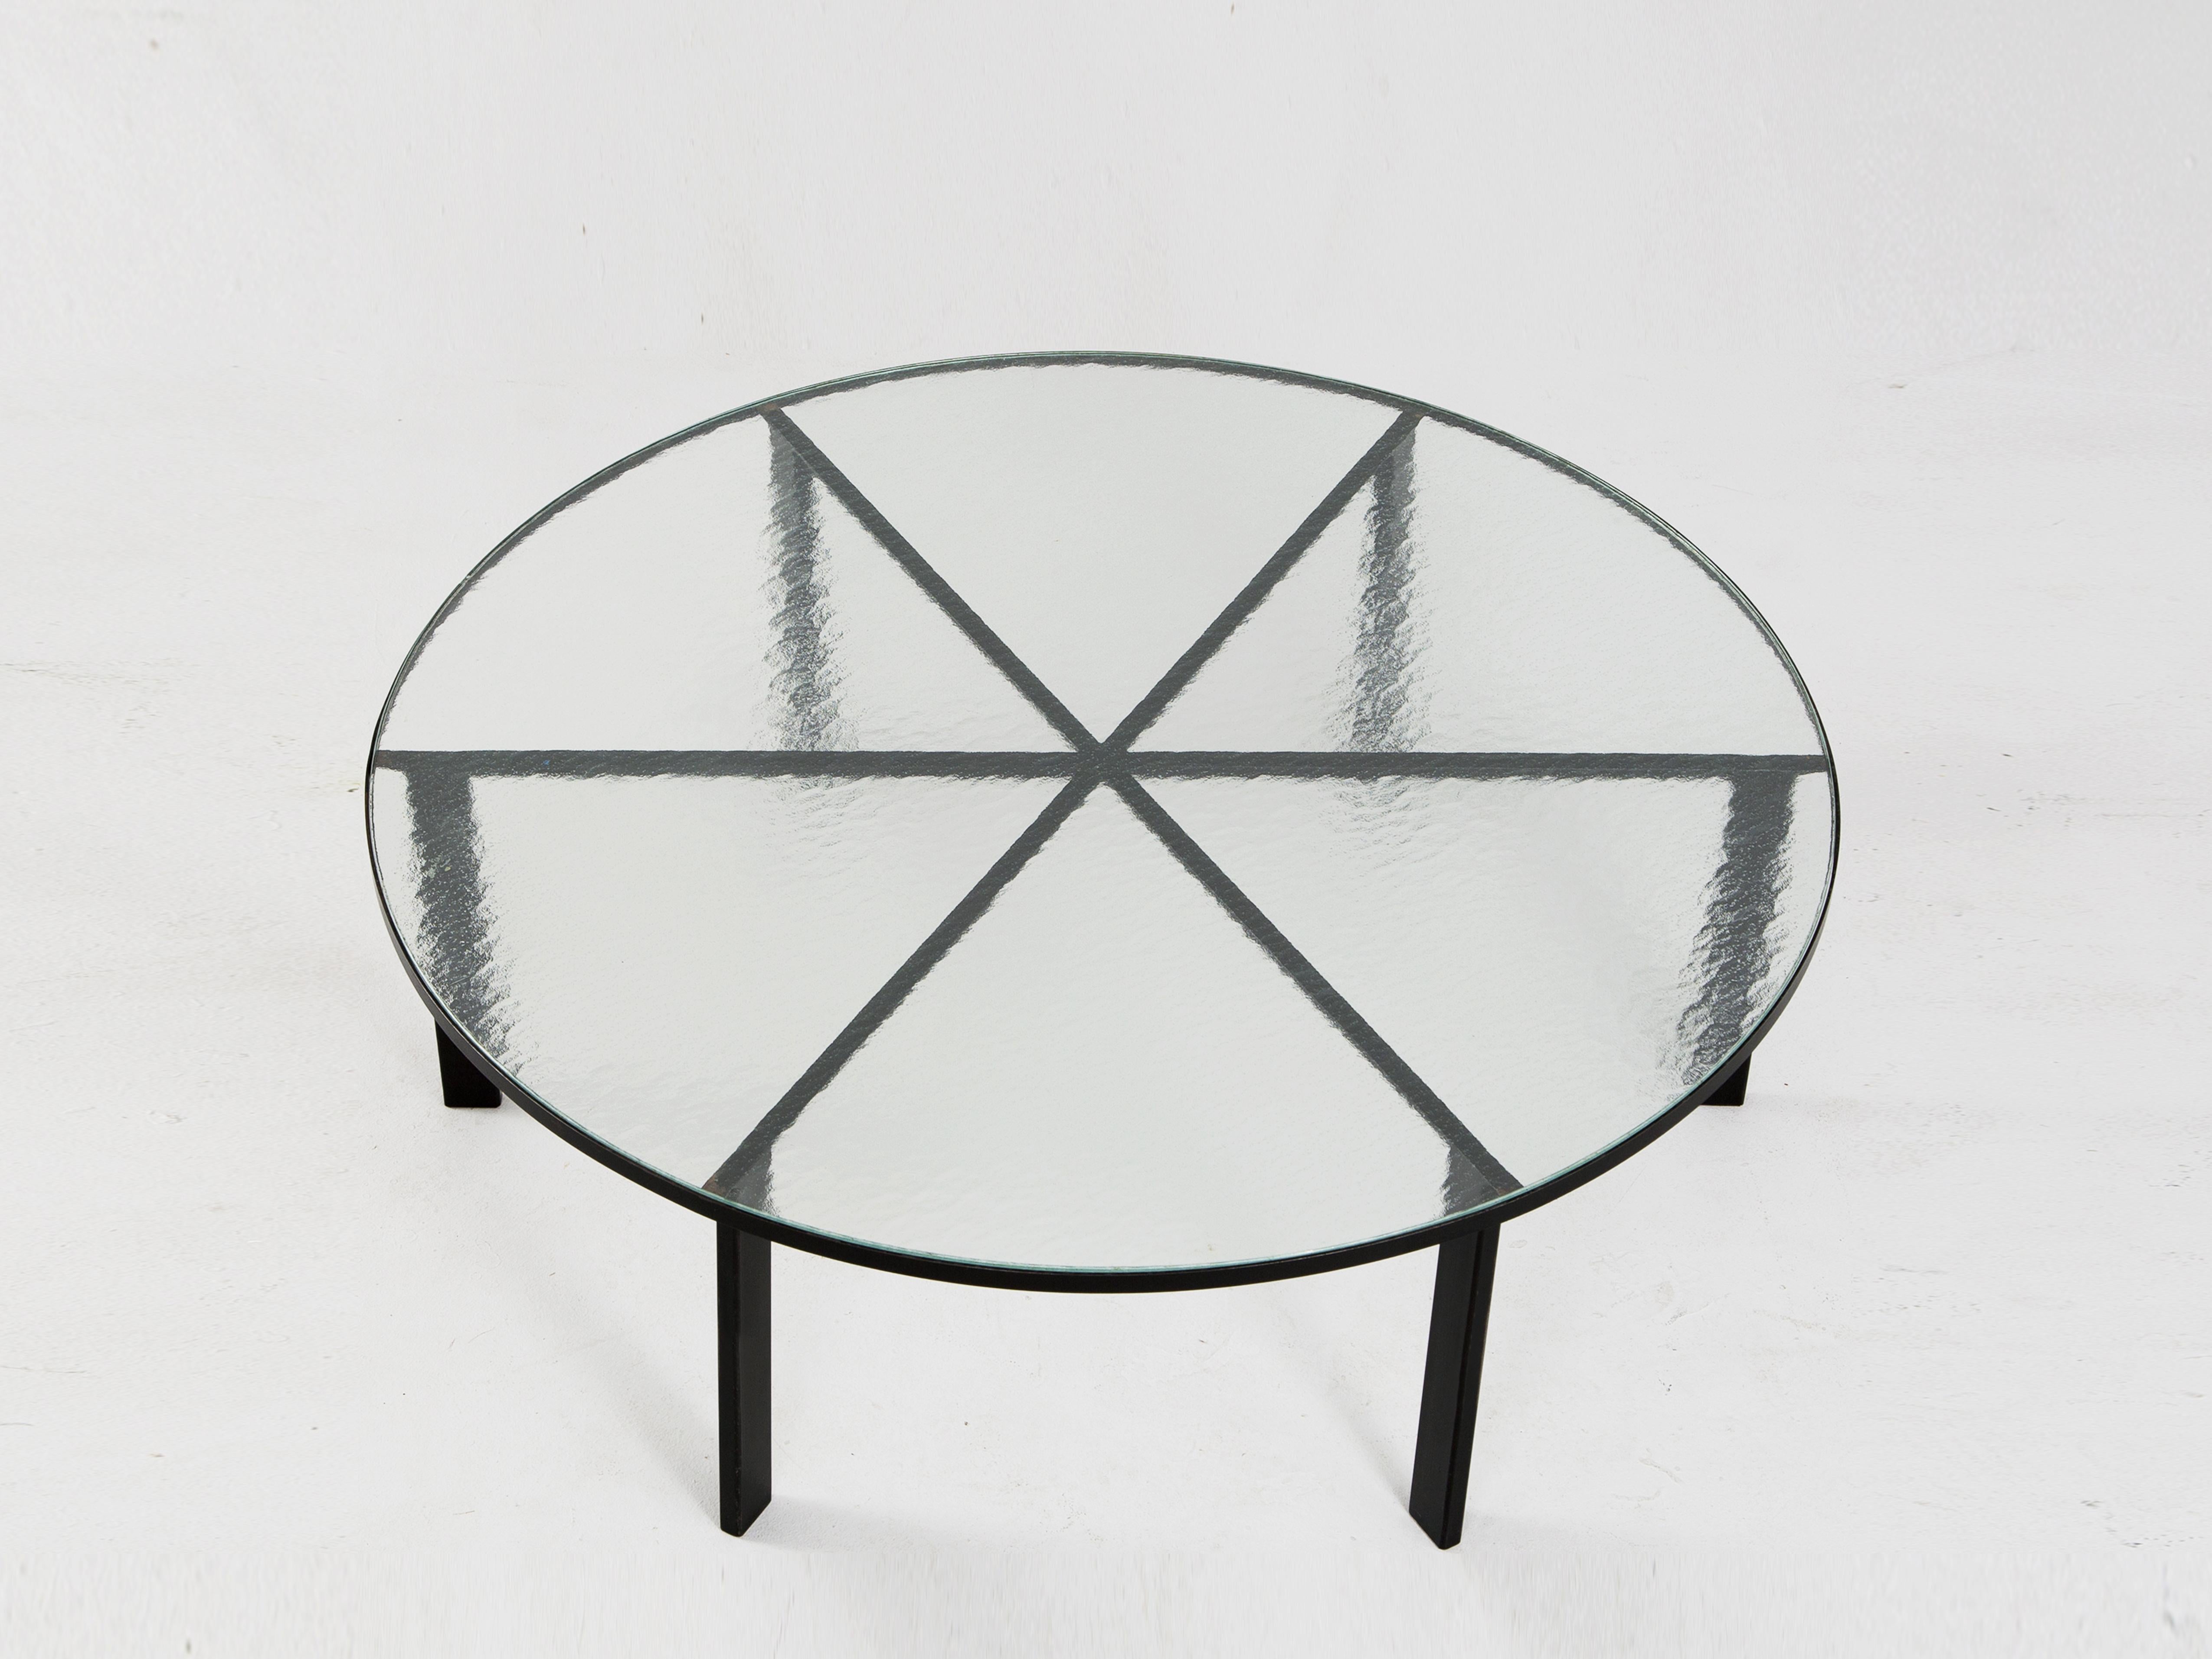 Janni van Pelt, coffee table, frosted glass, black coated metal, the Netherlands, 1950s

Dutch Modernist side table by Dutch designer Janni van Pelt. The round table is produced by Bas van Pelt and features a black coated squared tube frame. The